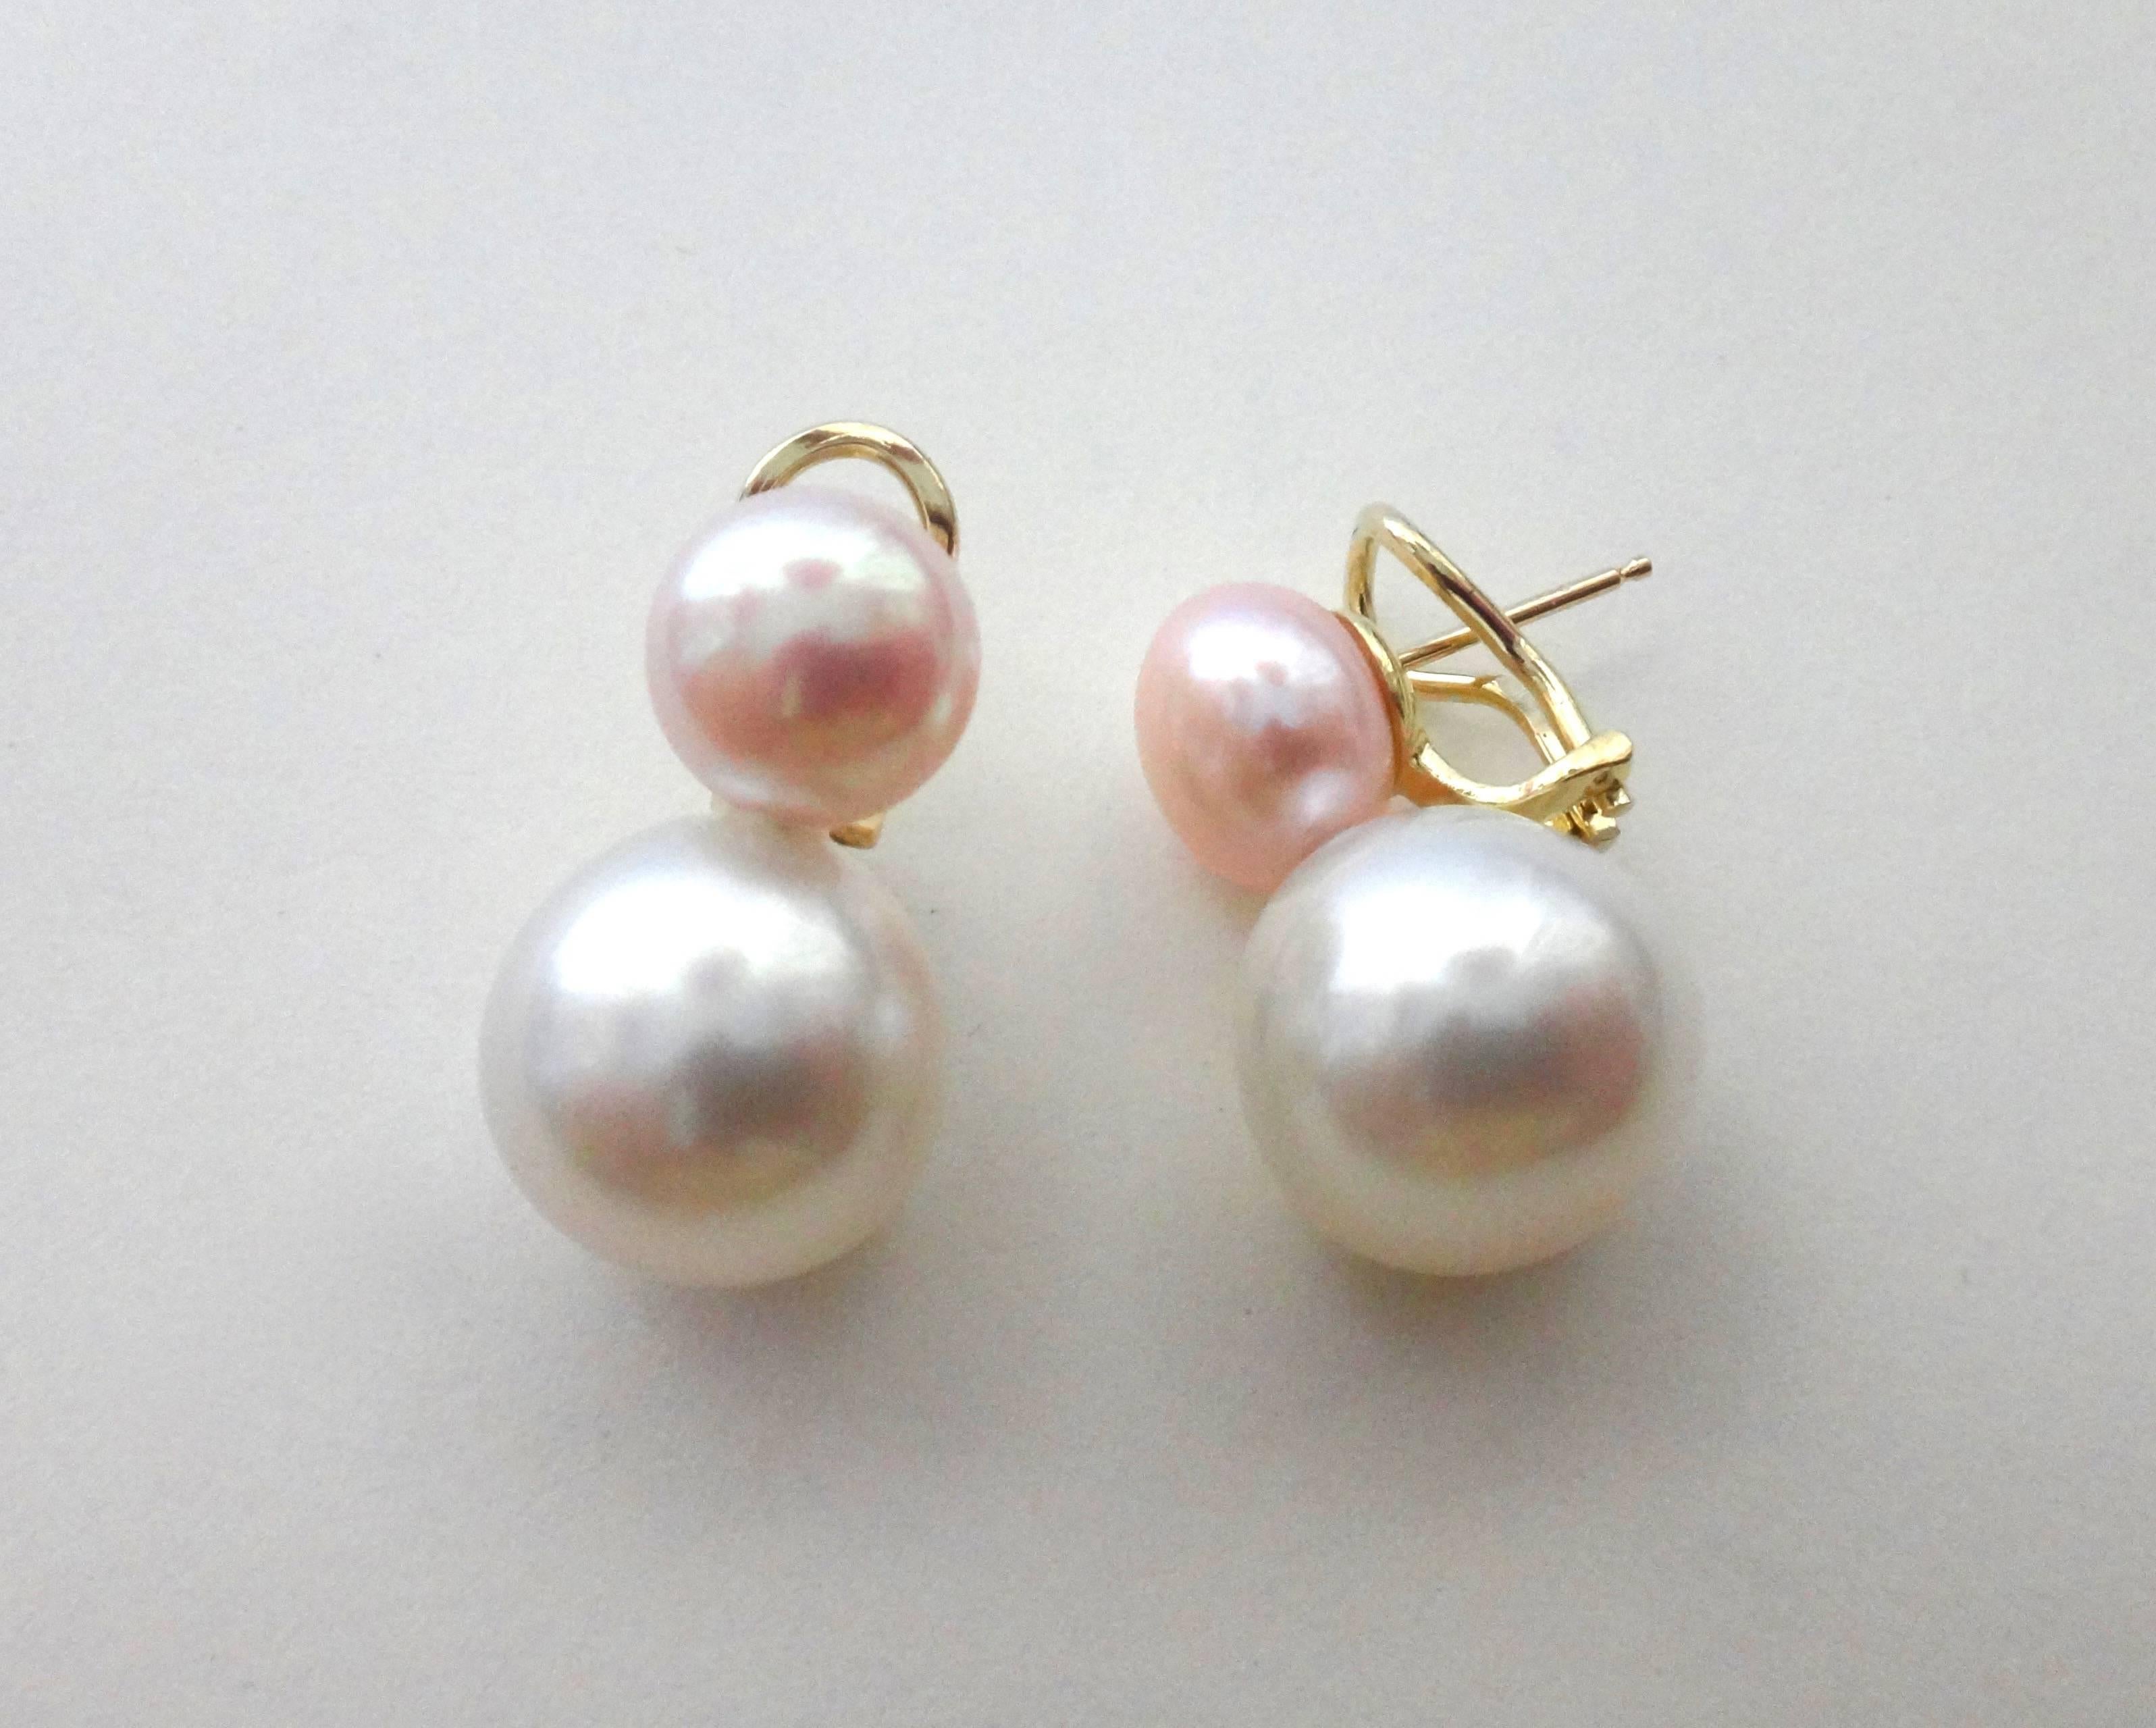 White South Seas and pink cultured pearls are paired in these 